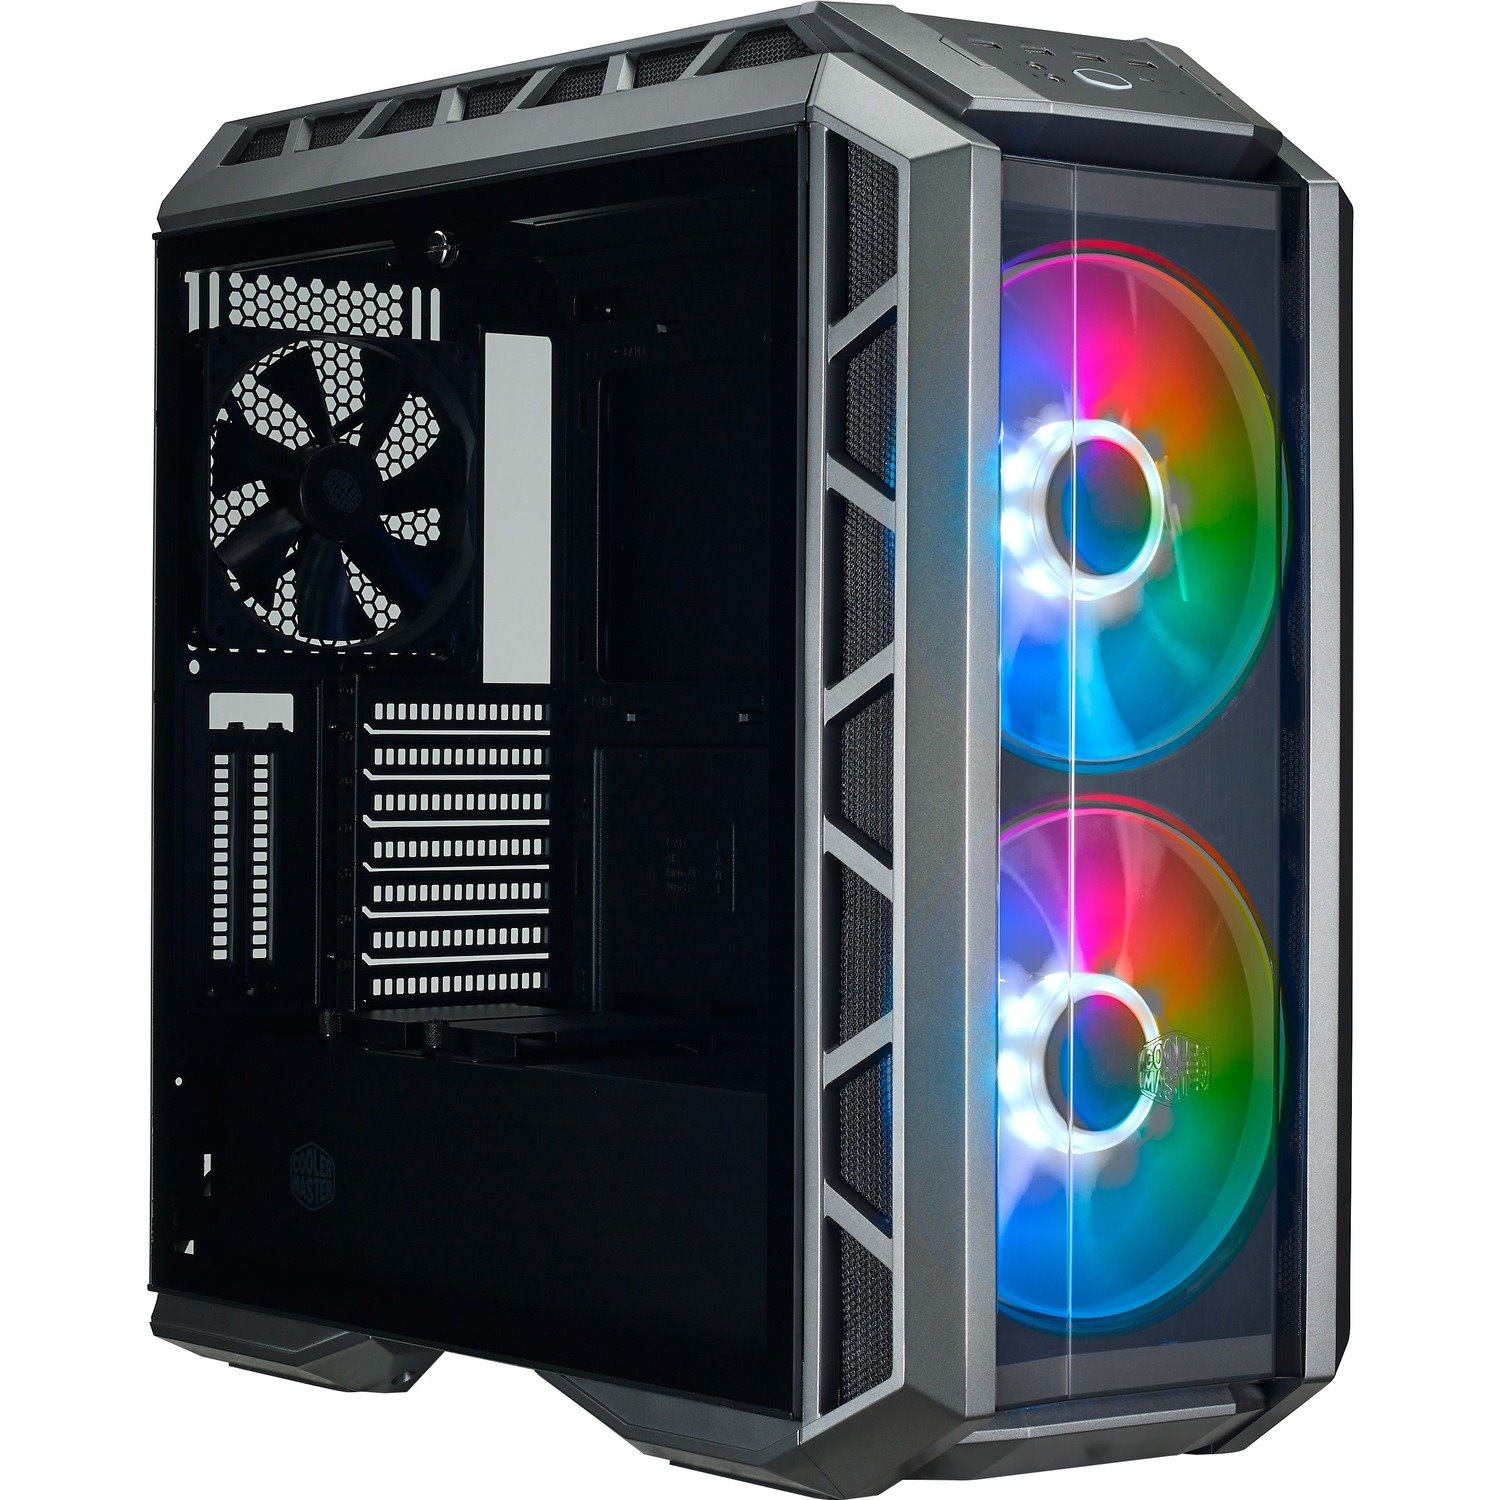 Cooler Master MasterCase MCM-H500P-MGNN-S01 Computer Case - Mini ITX, Micro ATX, ATX Motherboard Supported - Mid-tower - Steel, Plastic, Mesh, Tempered Glass - Gunmetal Black